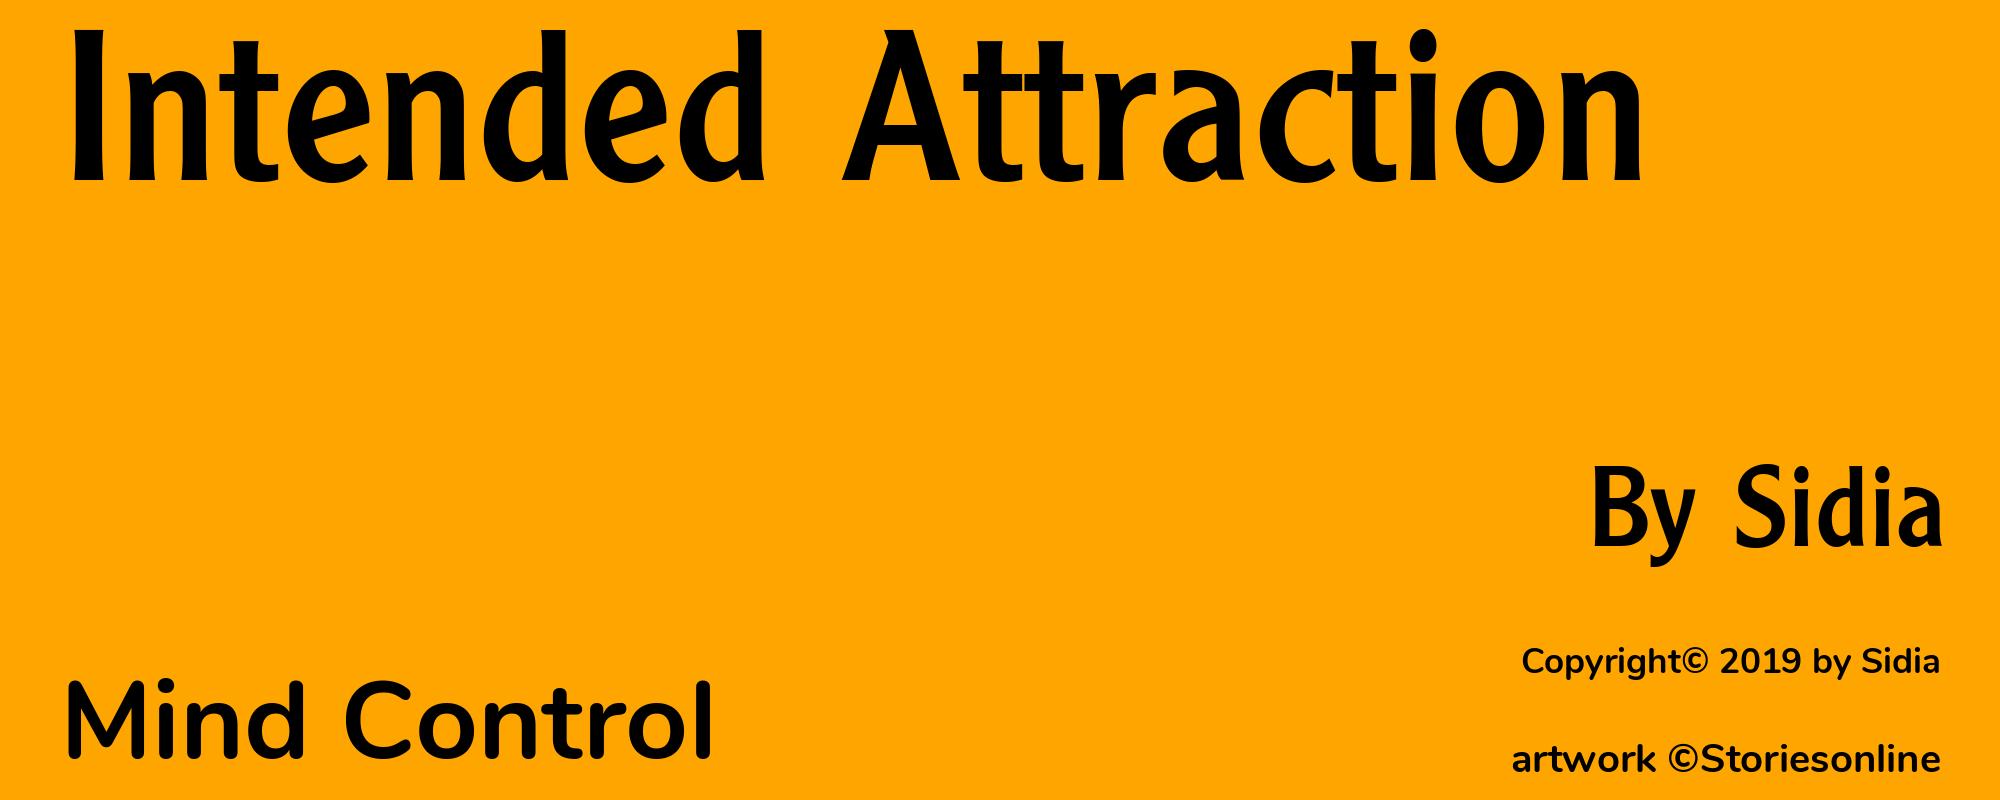 Intended Attraction - Cover